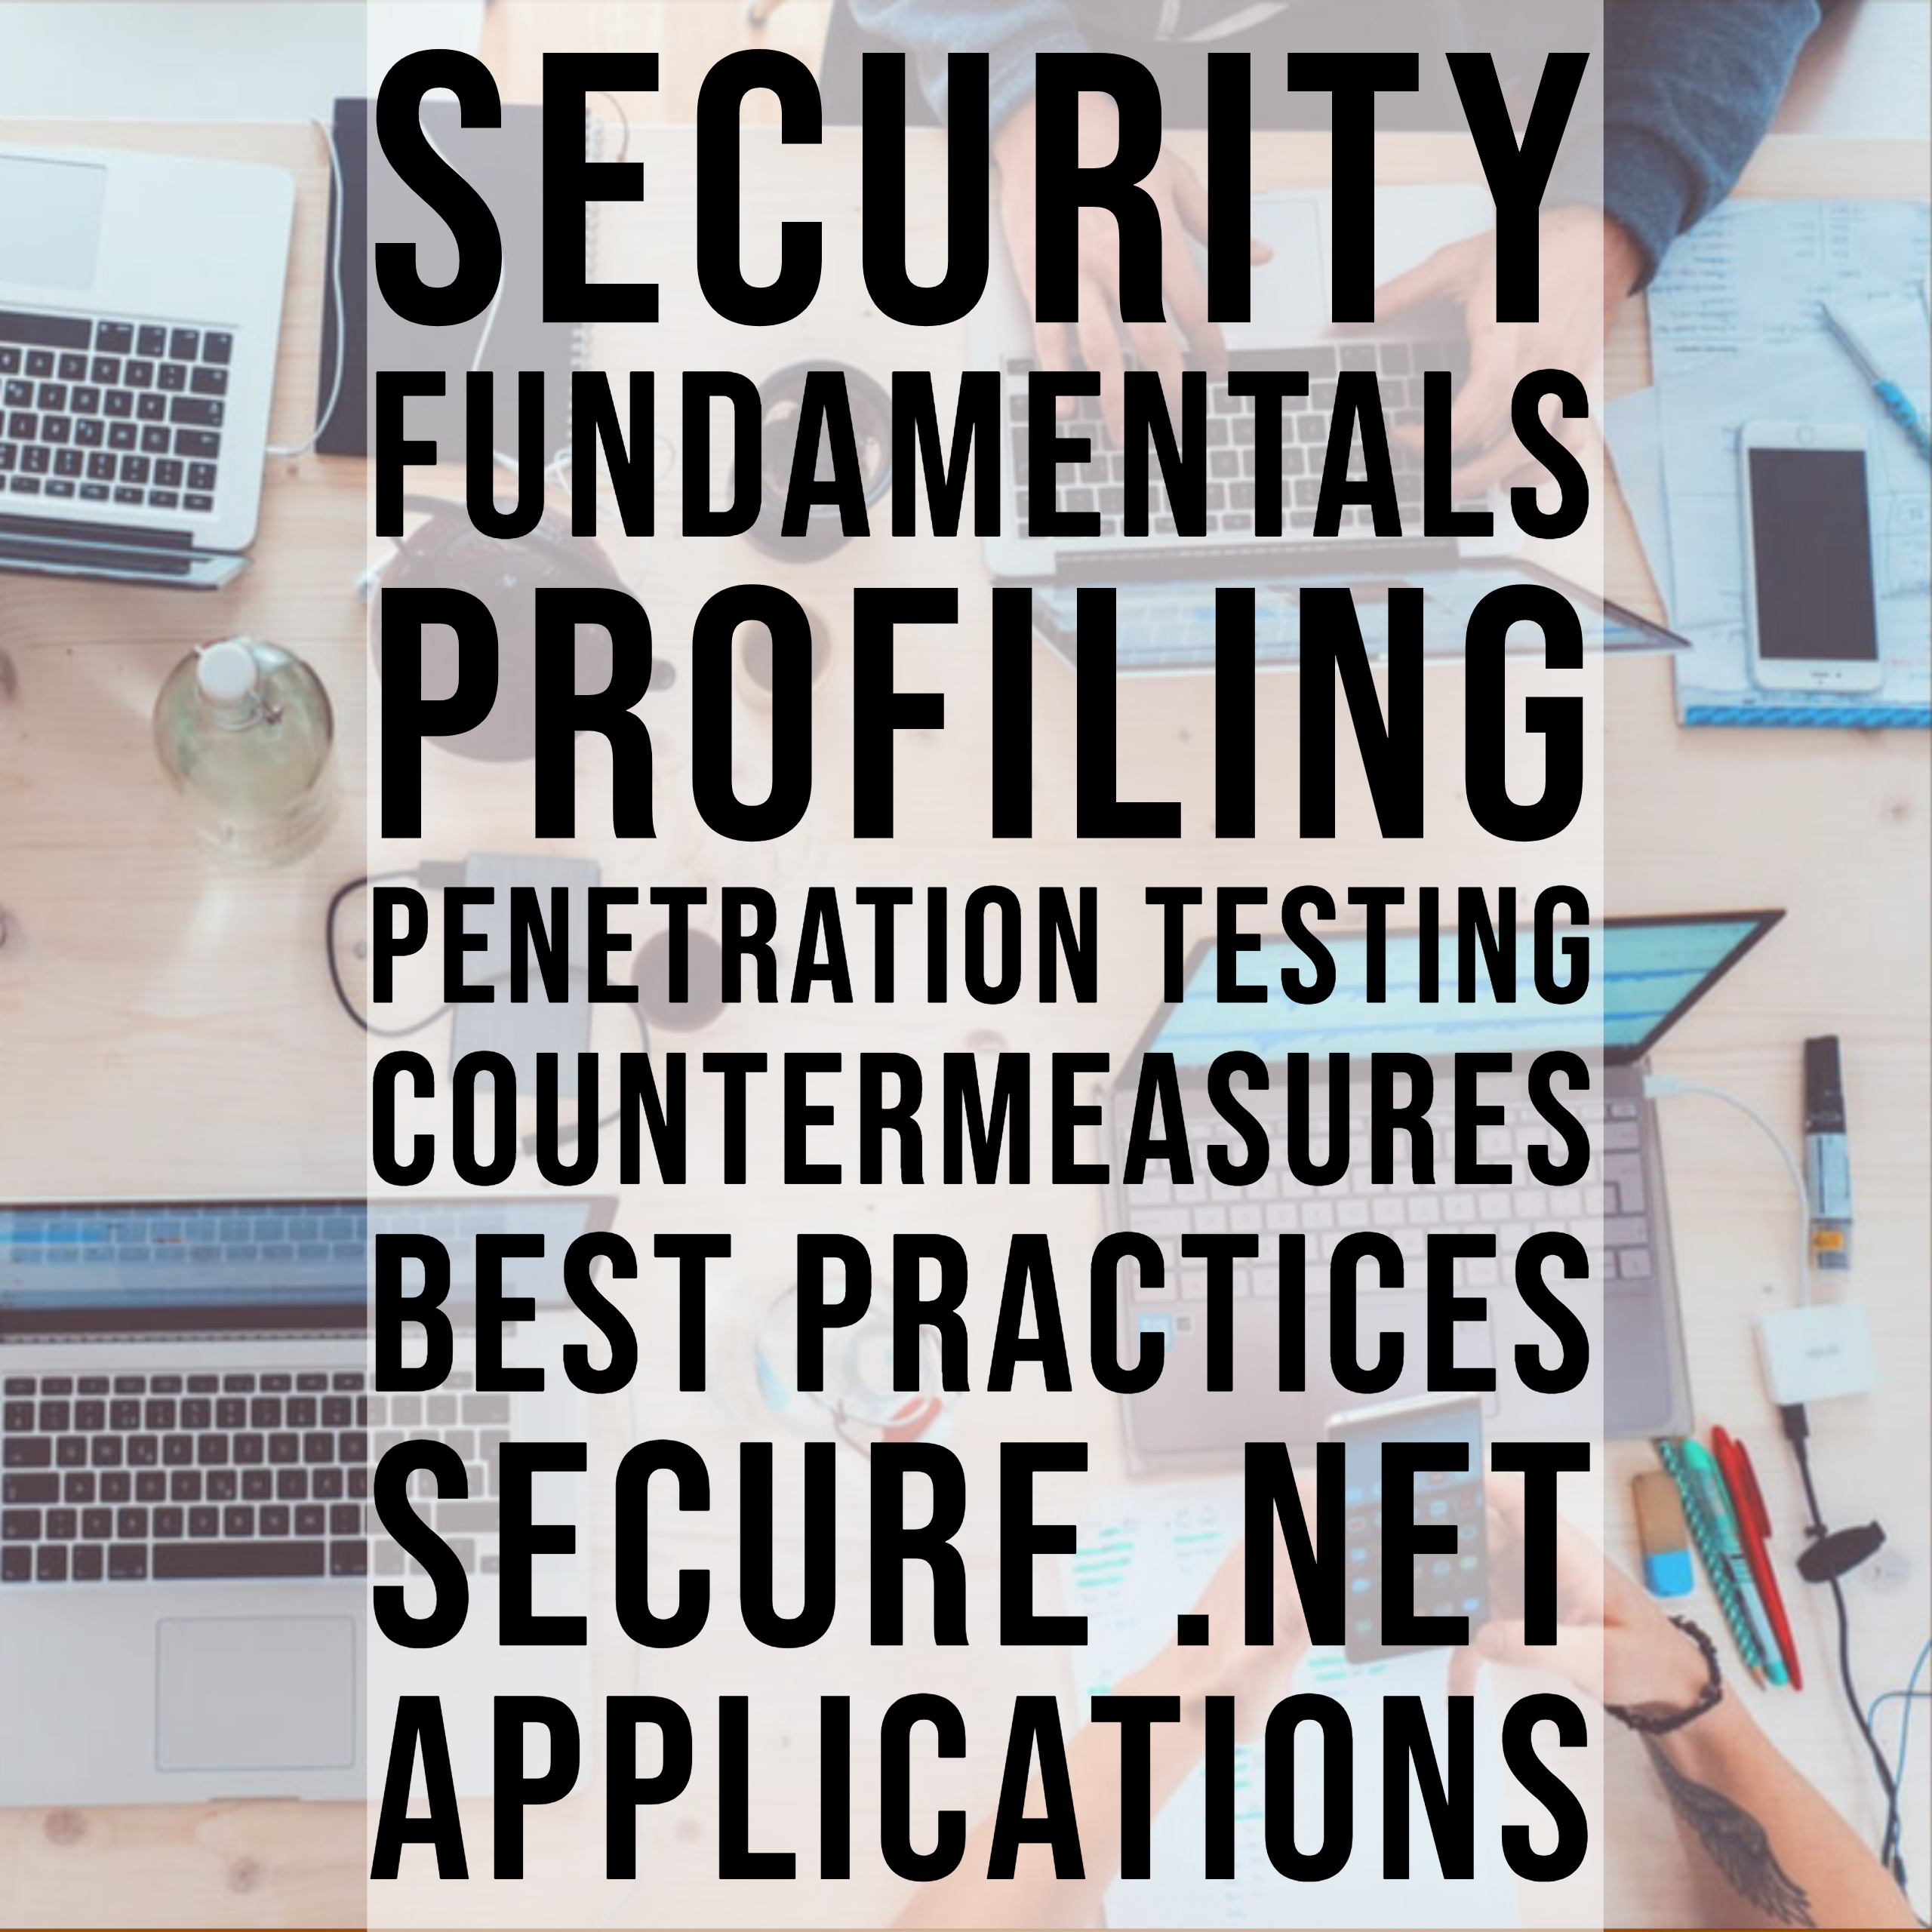 Security Fundamentals, Profiling, Pen Testing, Countermeasures, Best Practices in .NET, Secure .NET applications